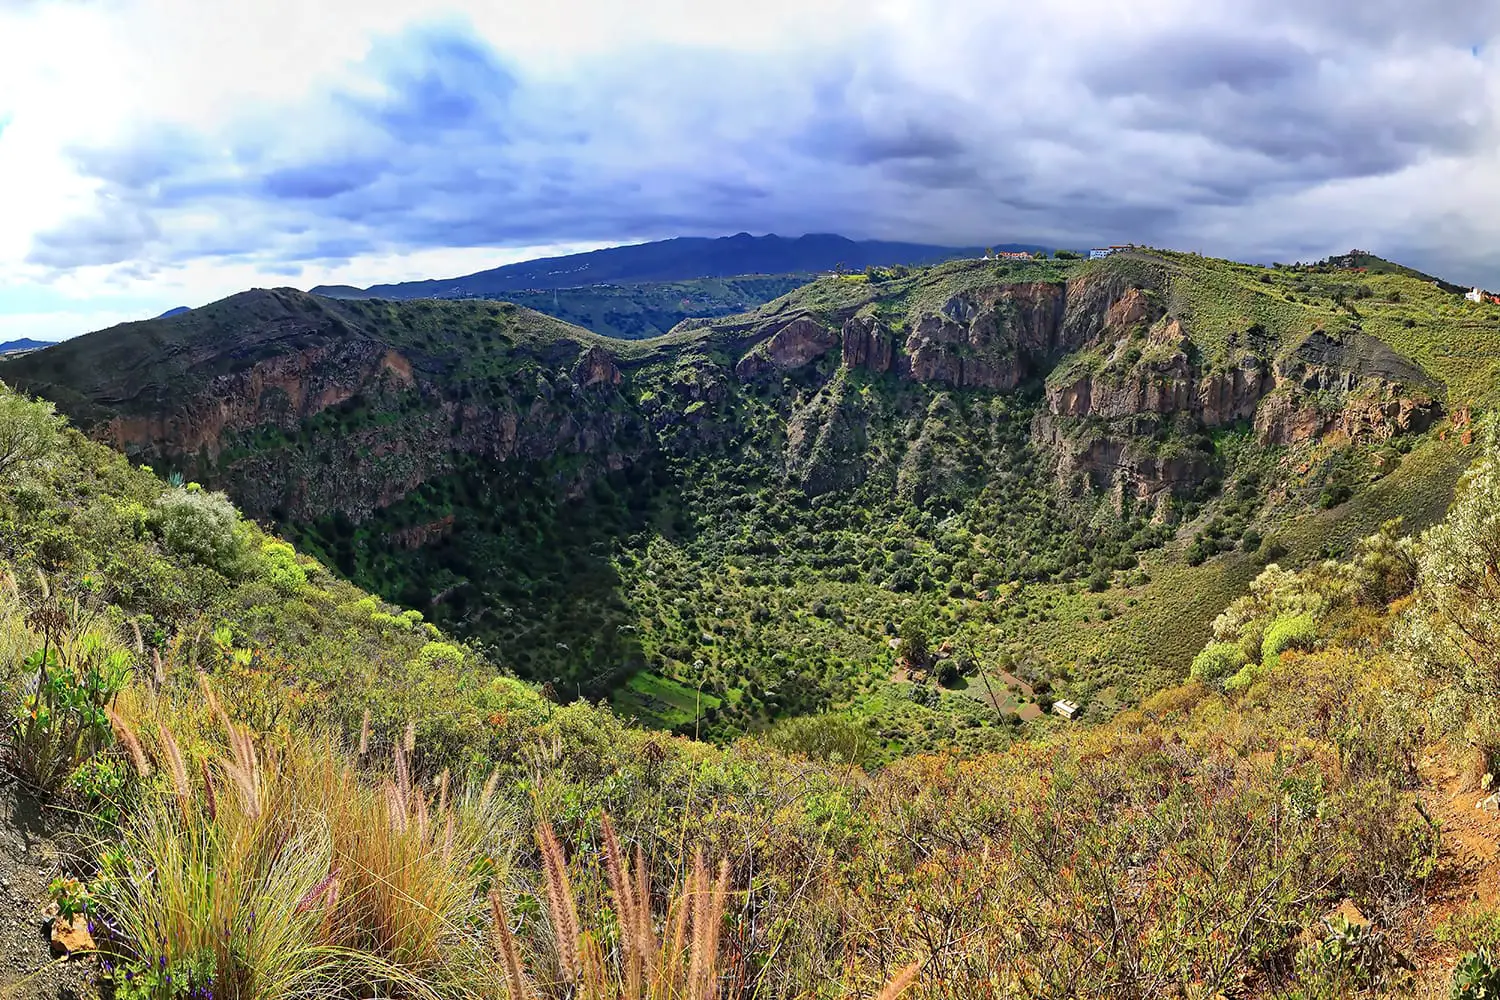 Bandama Crater is an extinct volcano on Gran Canaria, Canary Islands, Spain